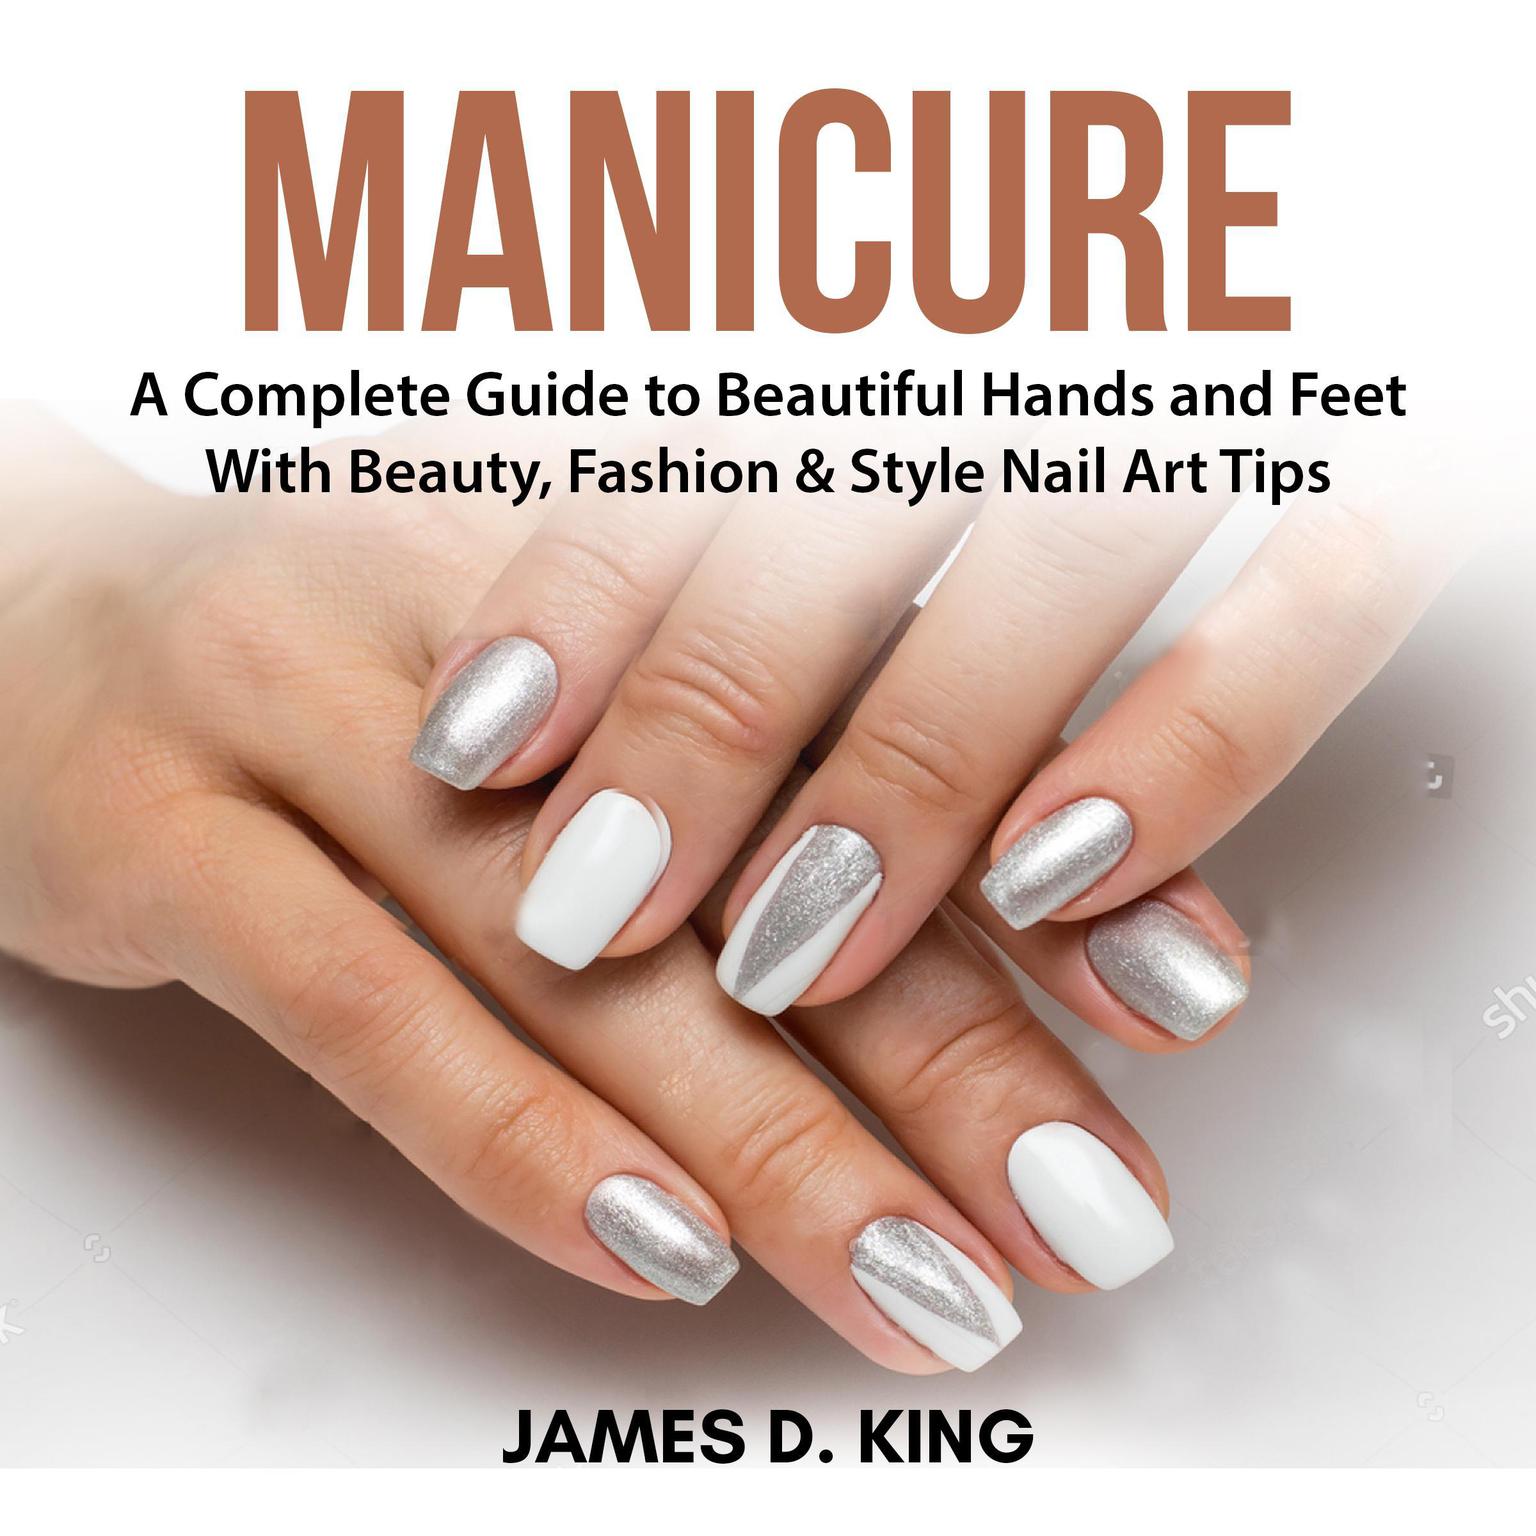 Manicure: A Complete Guide to Beautiful Hands and Feet With Beauty, Fashion & Style Nail Art Tips Audiobook, by James D. King